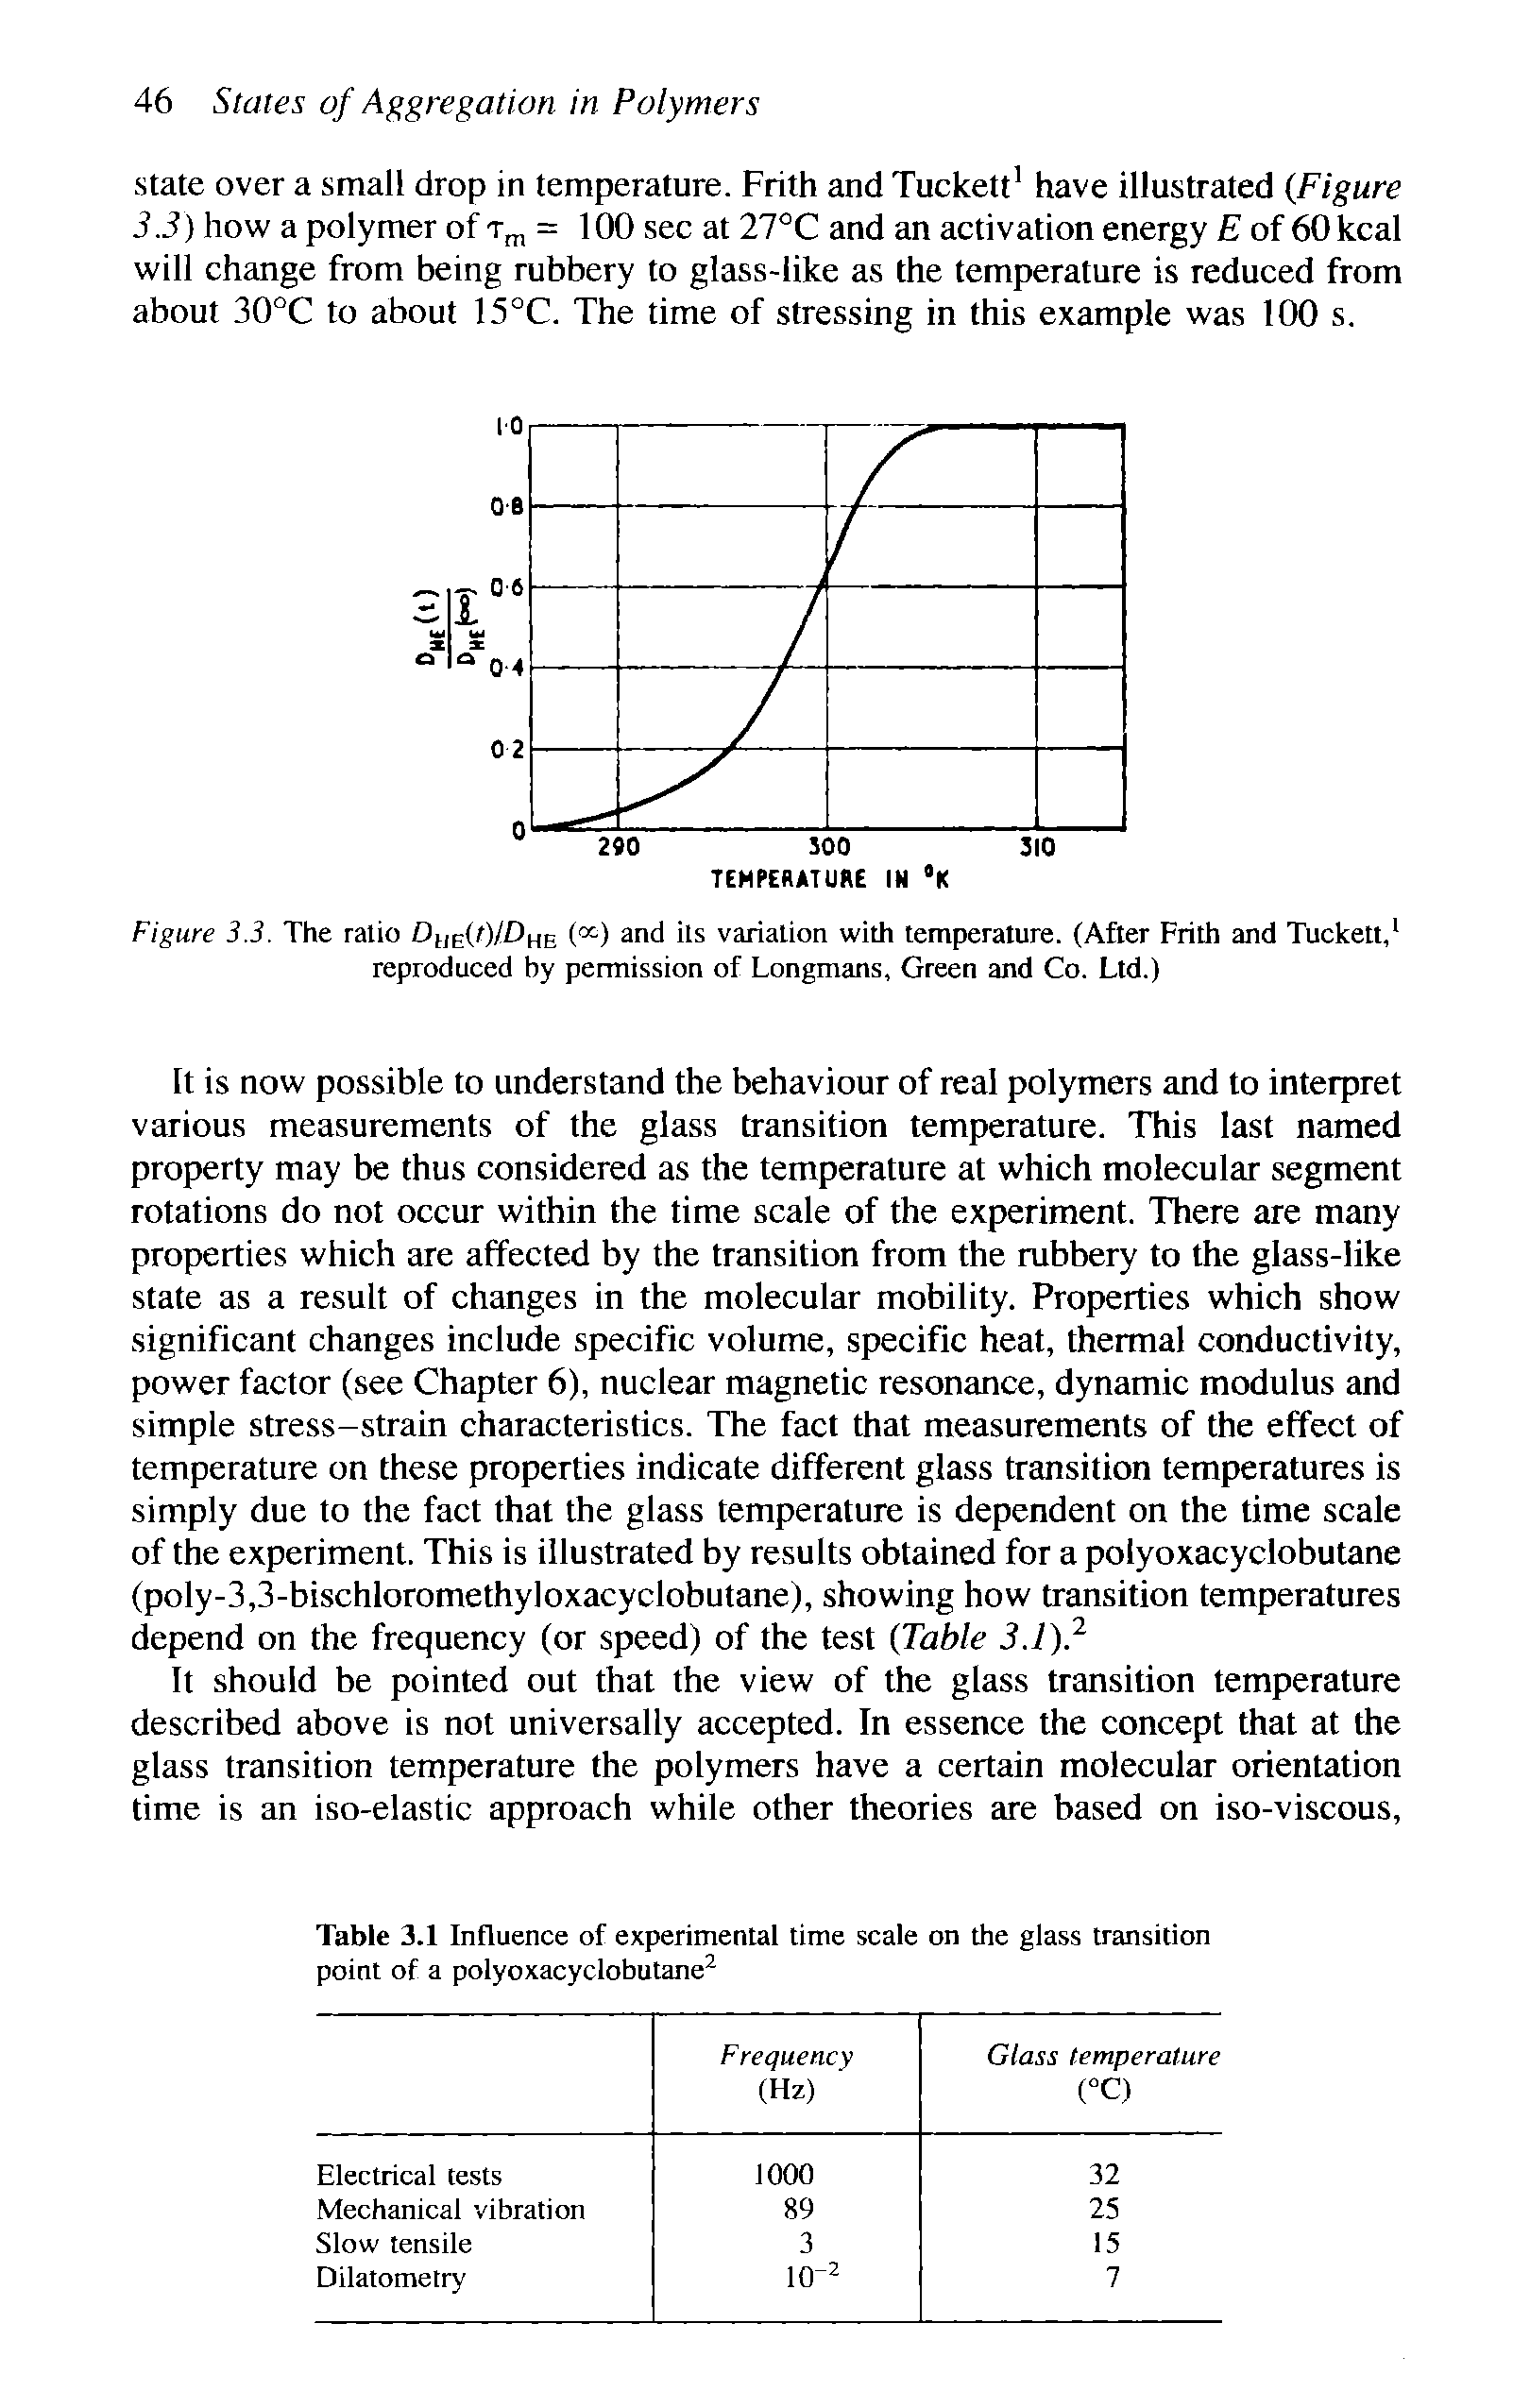 Figure 3.3. The ratio Di, (t)/DHE ( ) and its variation with temperature. (After Frith and Tuckett, reproduced by permission of Longmans, Green and Co. Ltd.)...